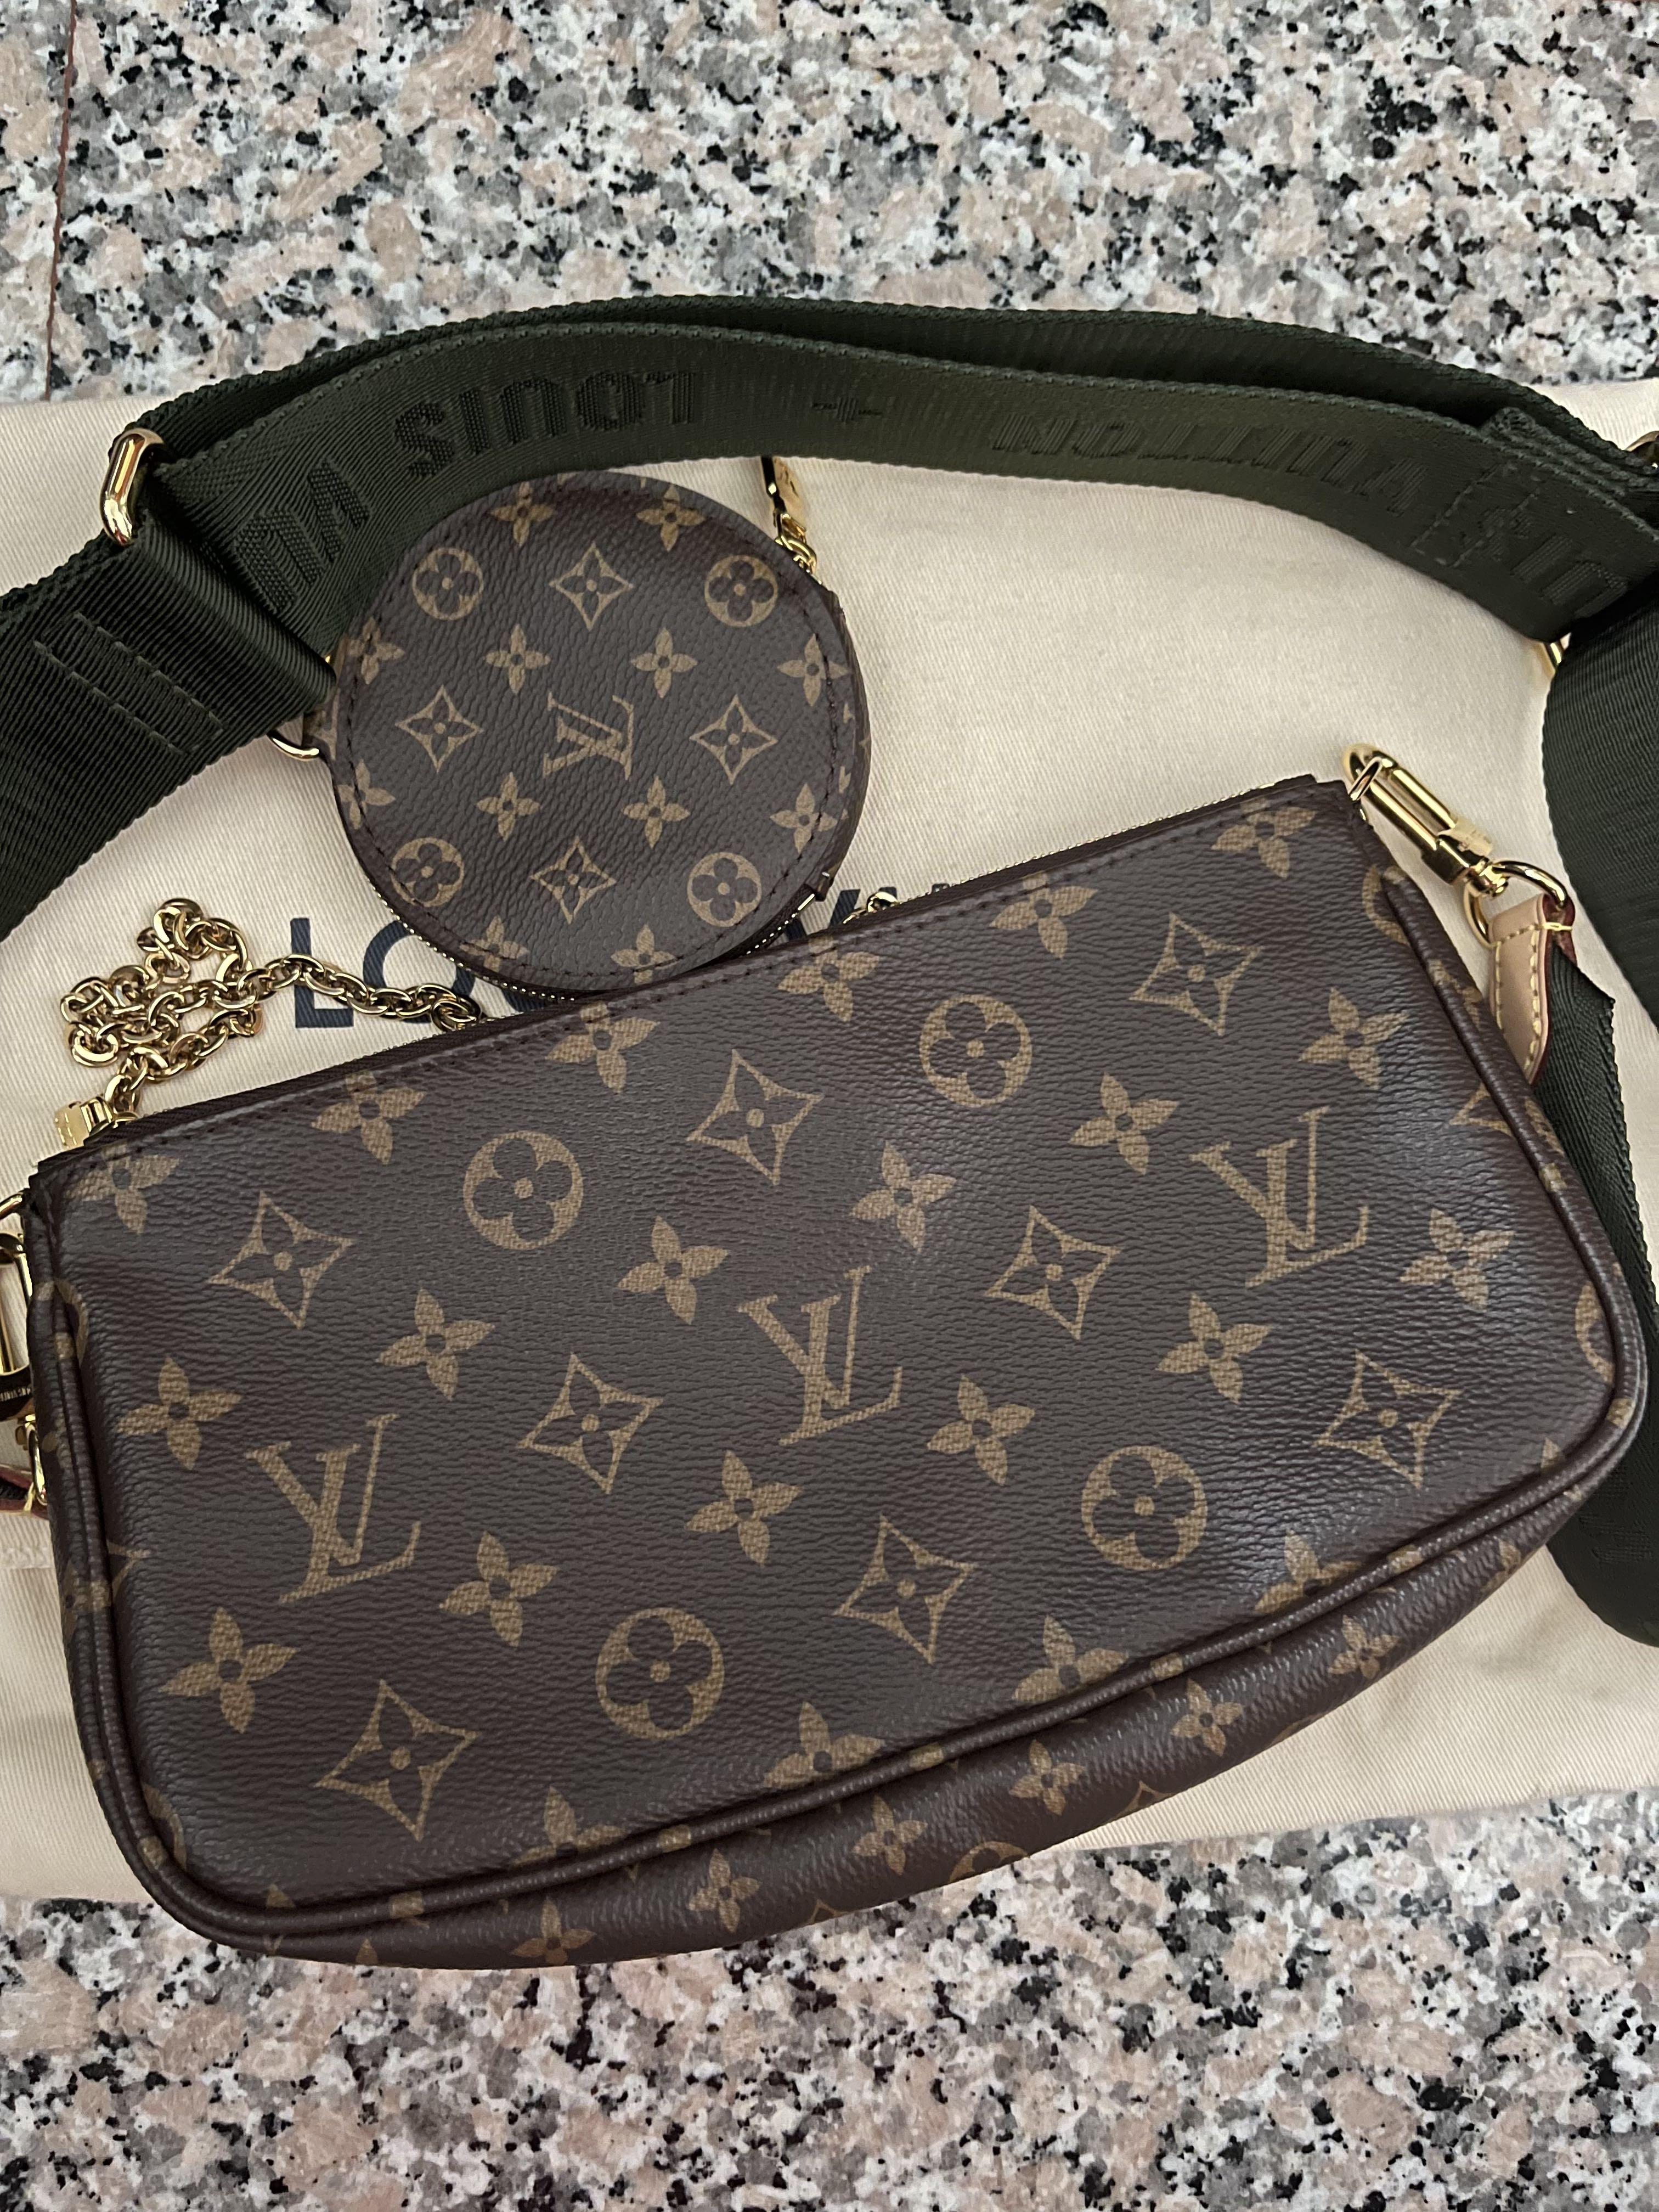 Which should be next purchase? Speedy 20 or Multi Pochette Accessoires? :  r/Louisvuitton